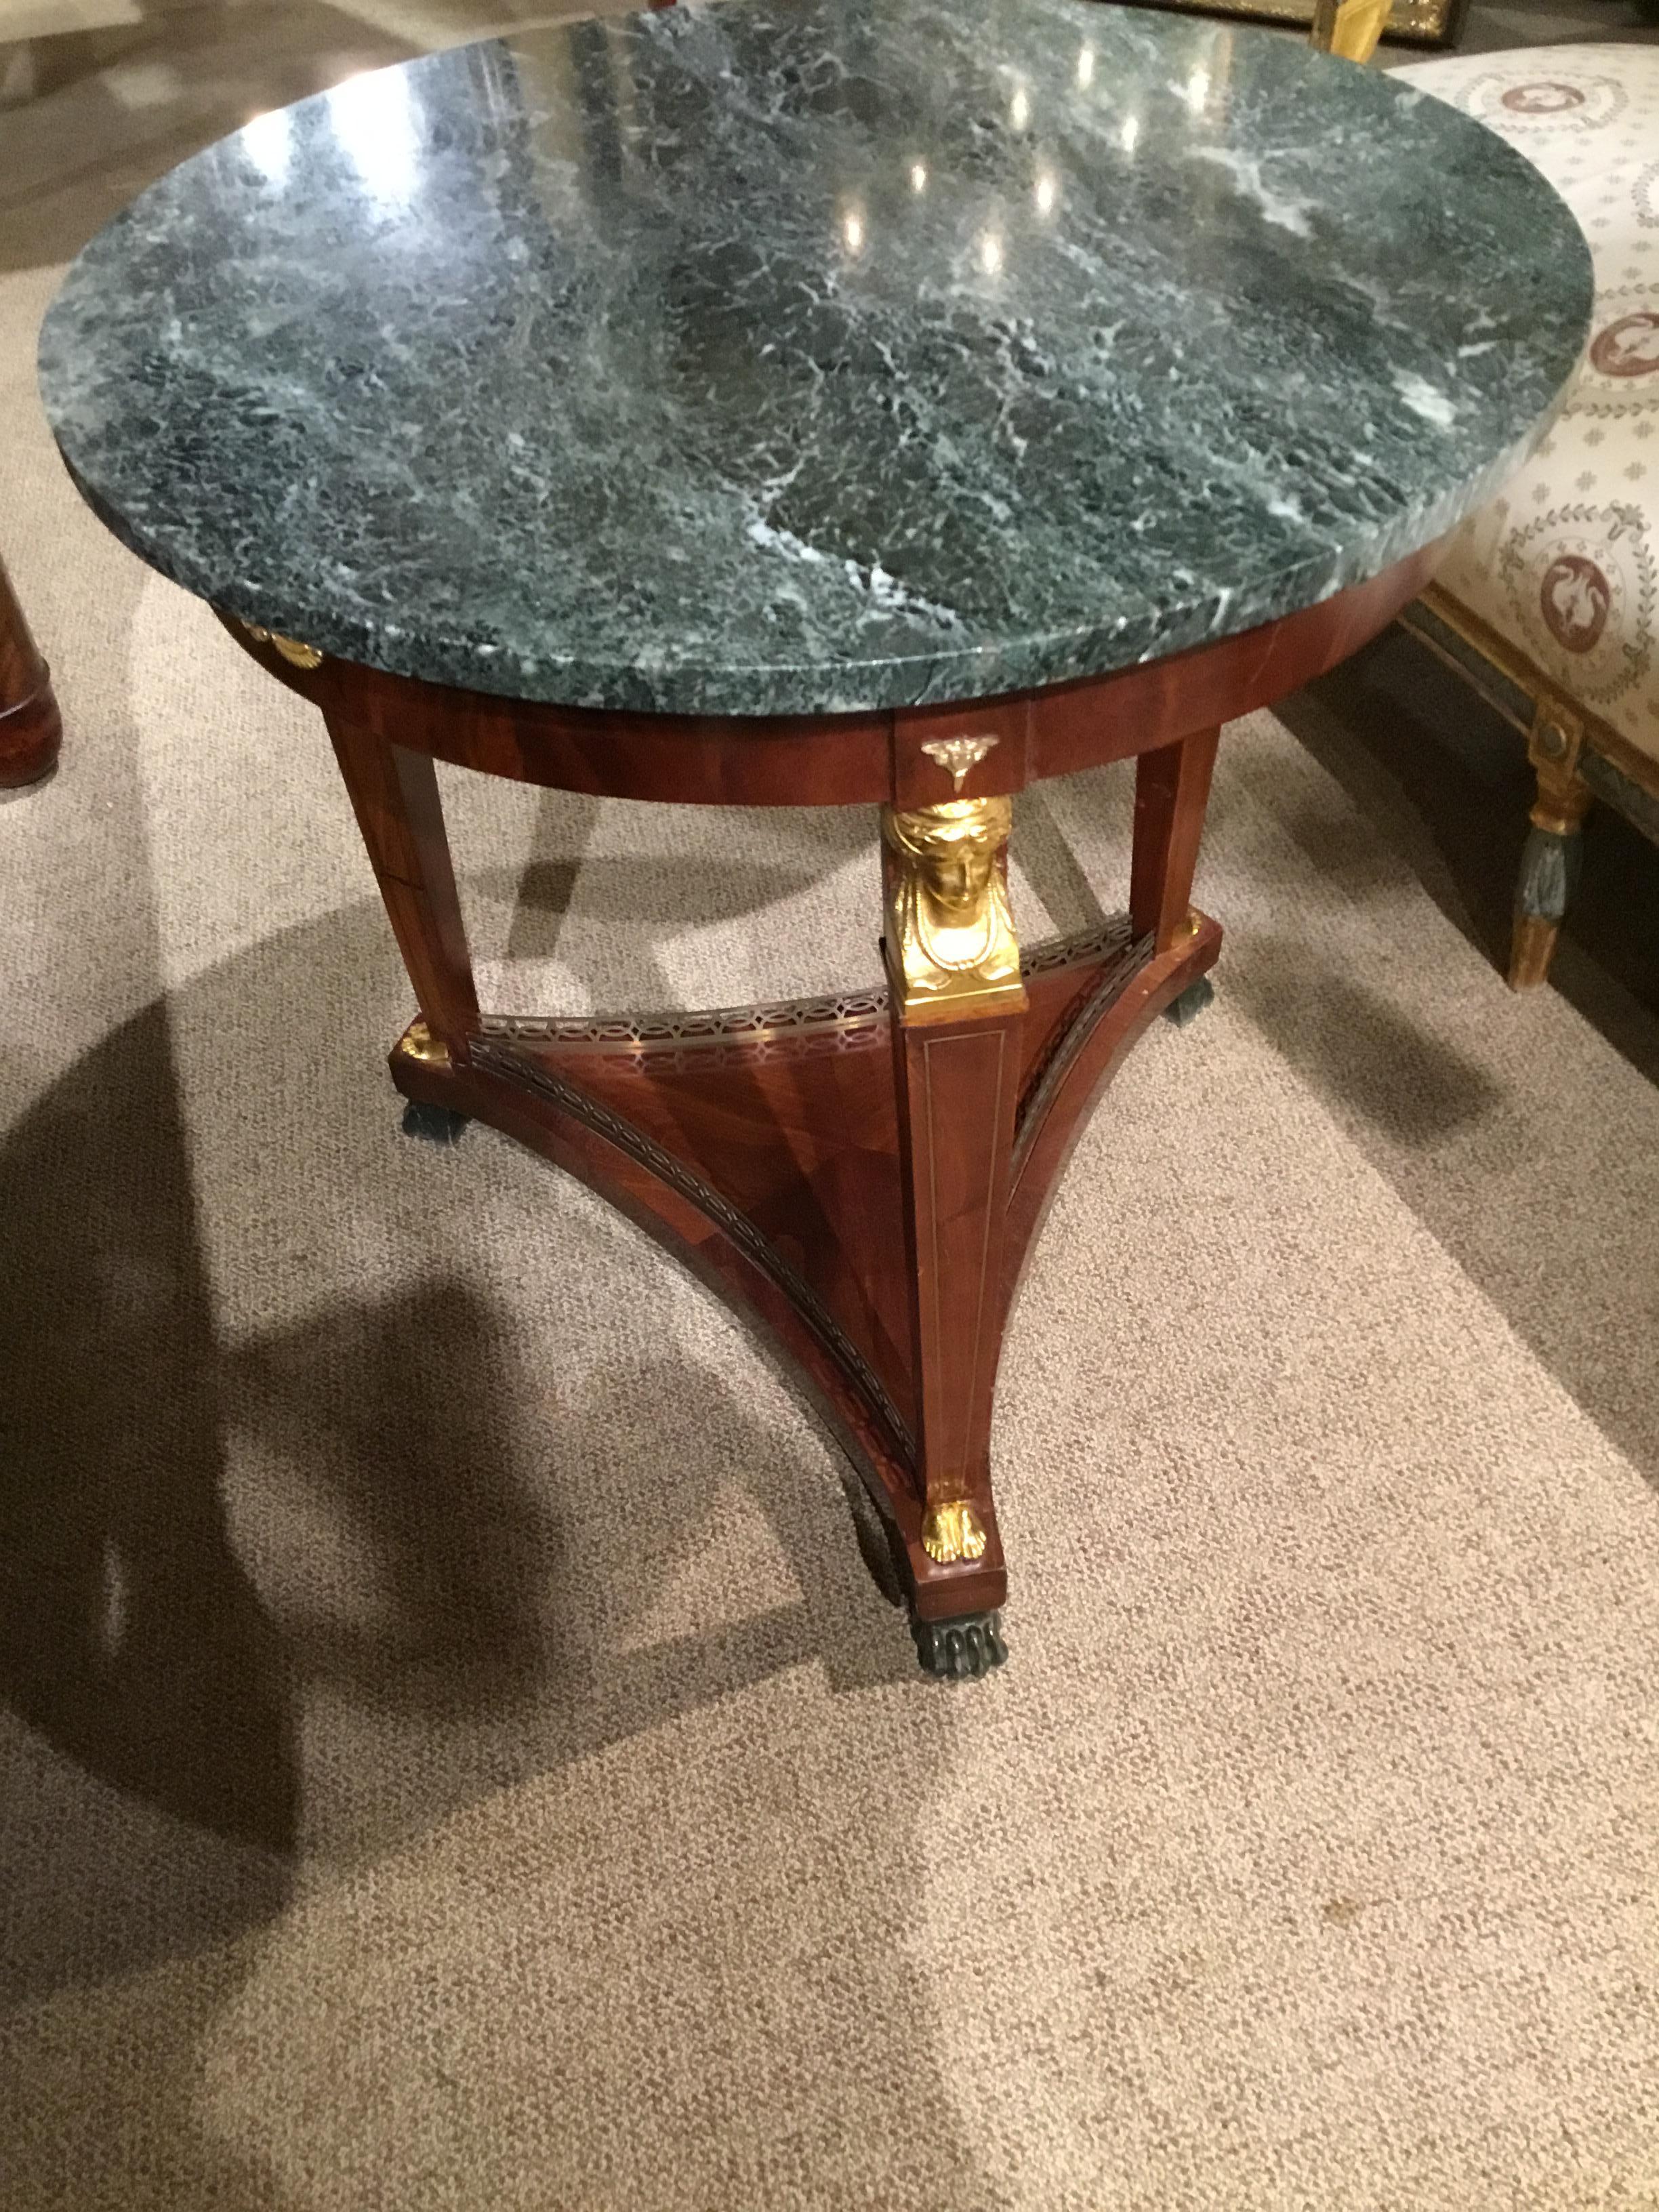 Mahogany Empire Style French Gueridon Round Table with Green Marble Top 19th Century For Sale